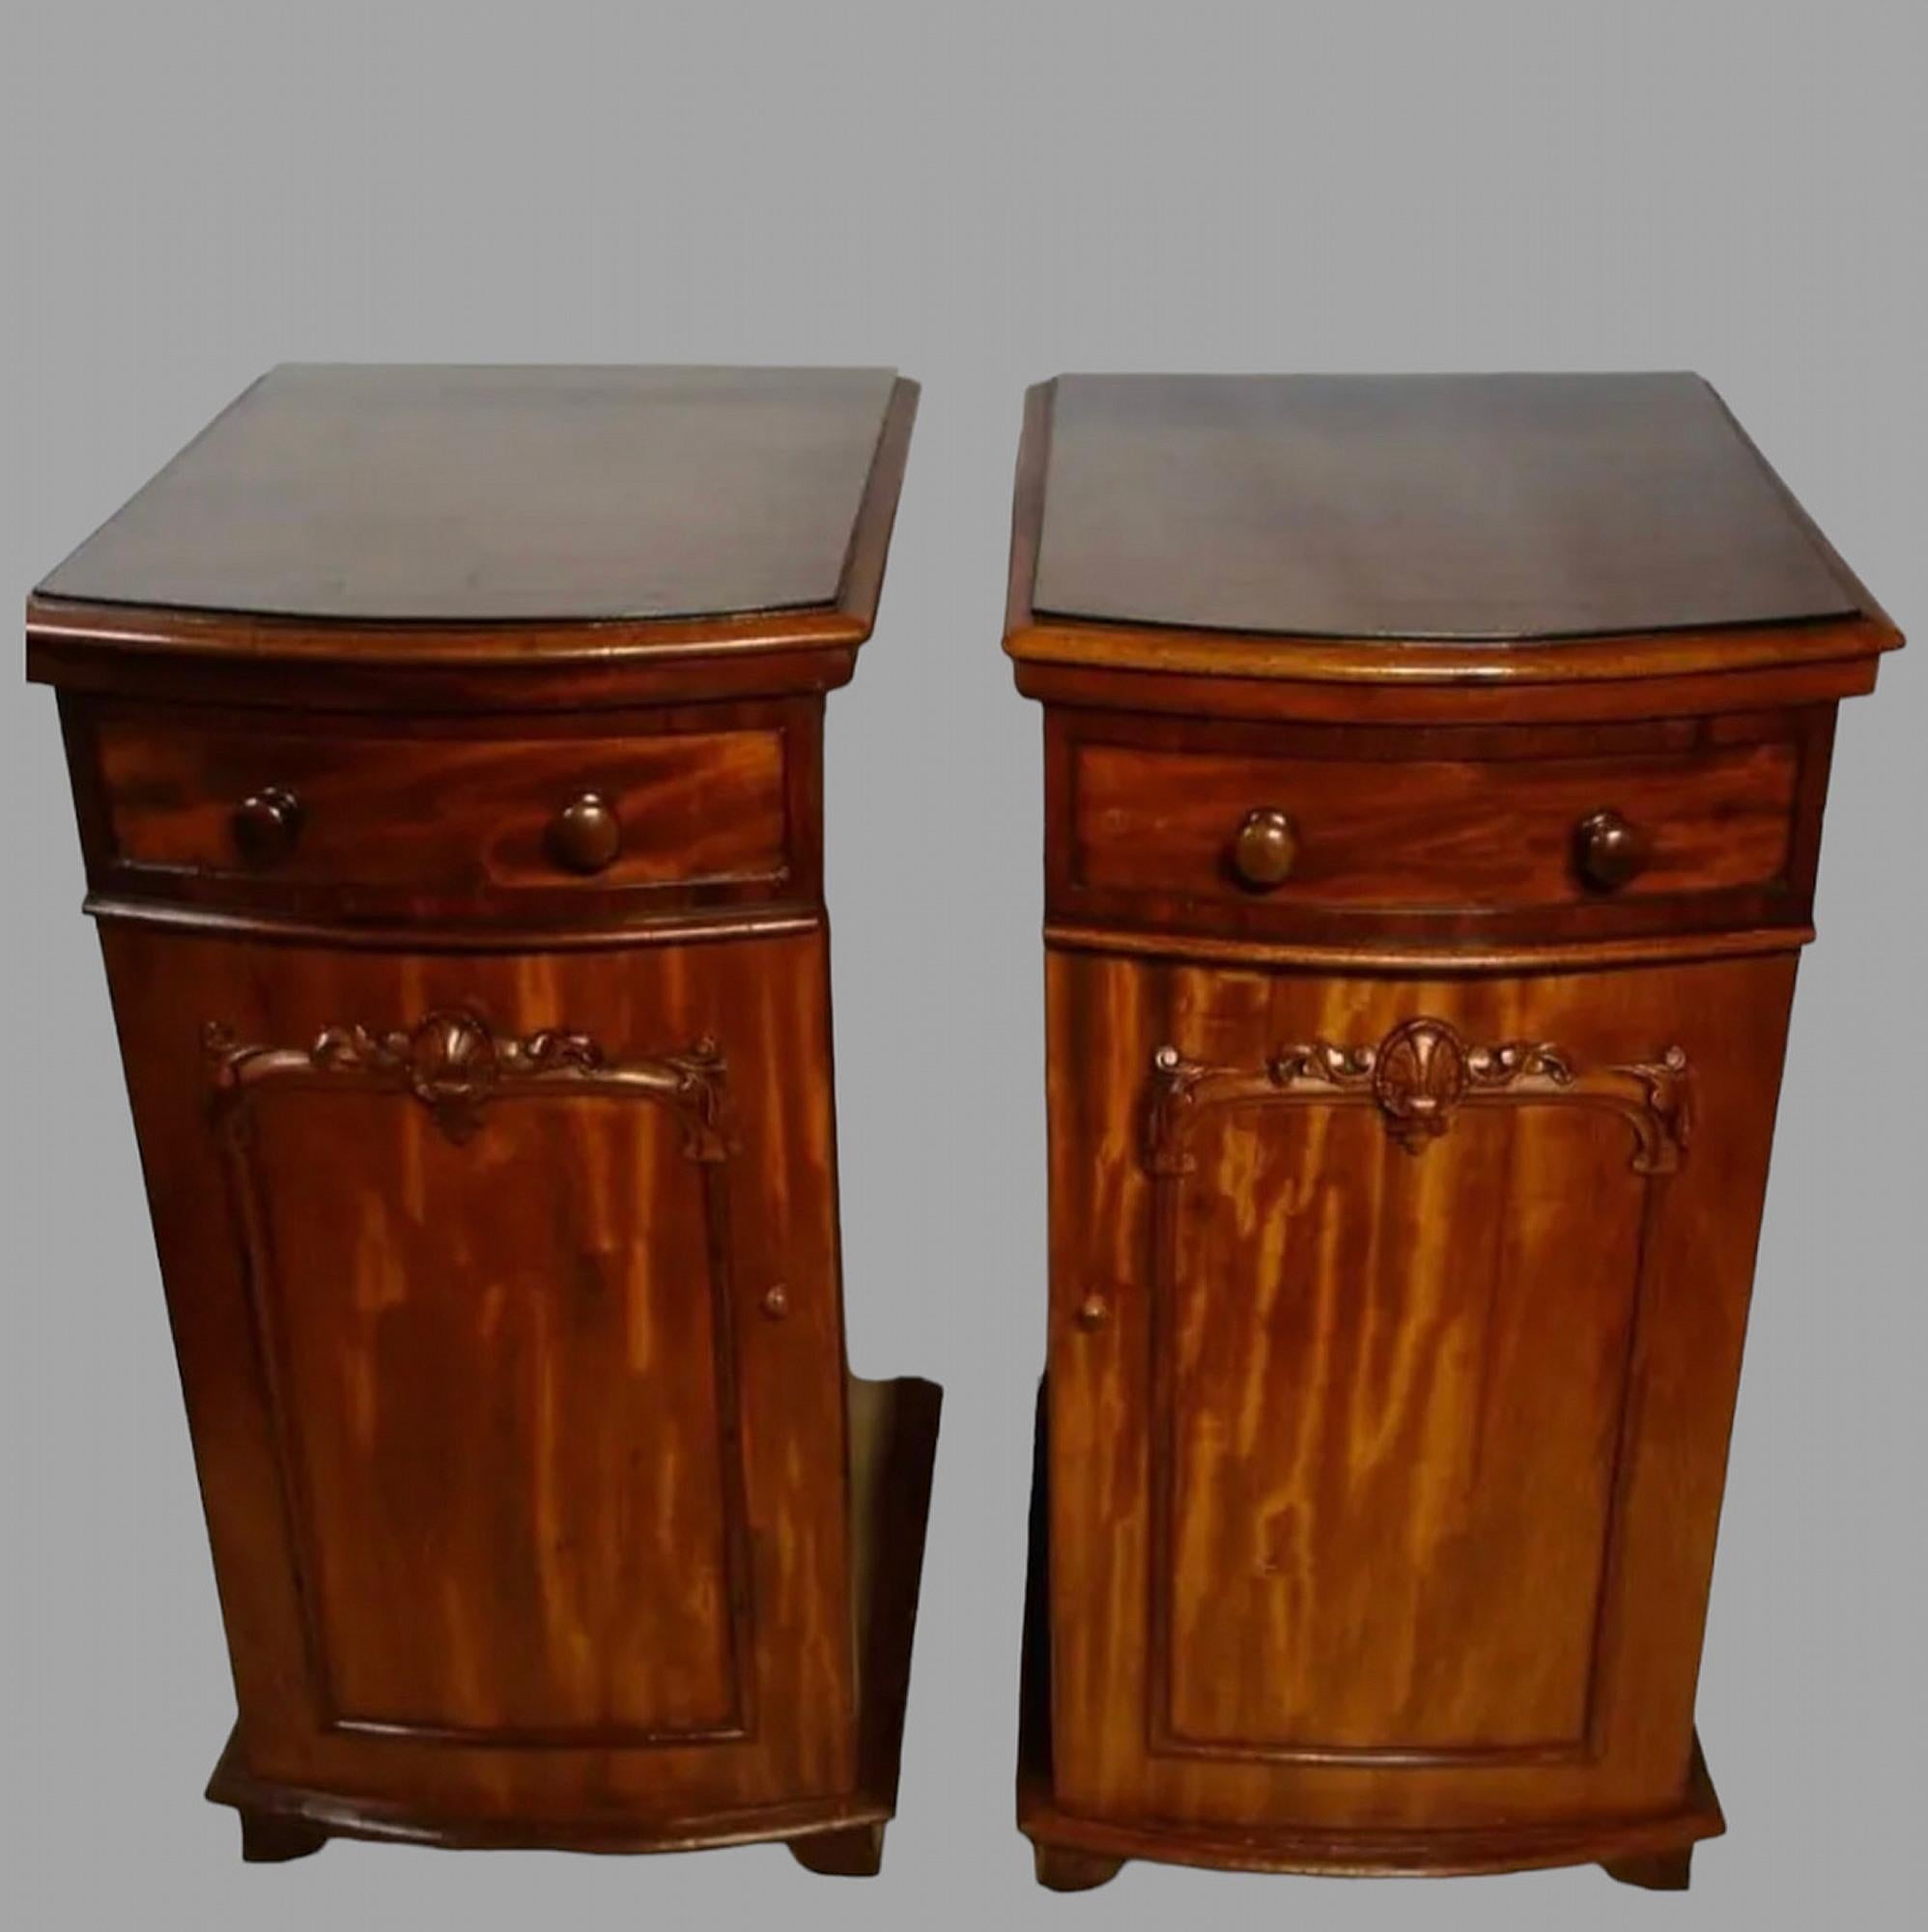 A Pair of Regency Mahogany Pedestal/Bedside Cabinets each with a drawer and a cupboard revealing two sliding shelves. Both have had glass tops made for them. A great pair.